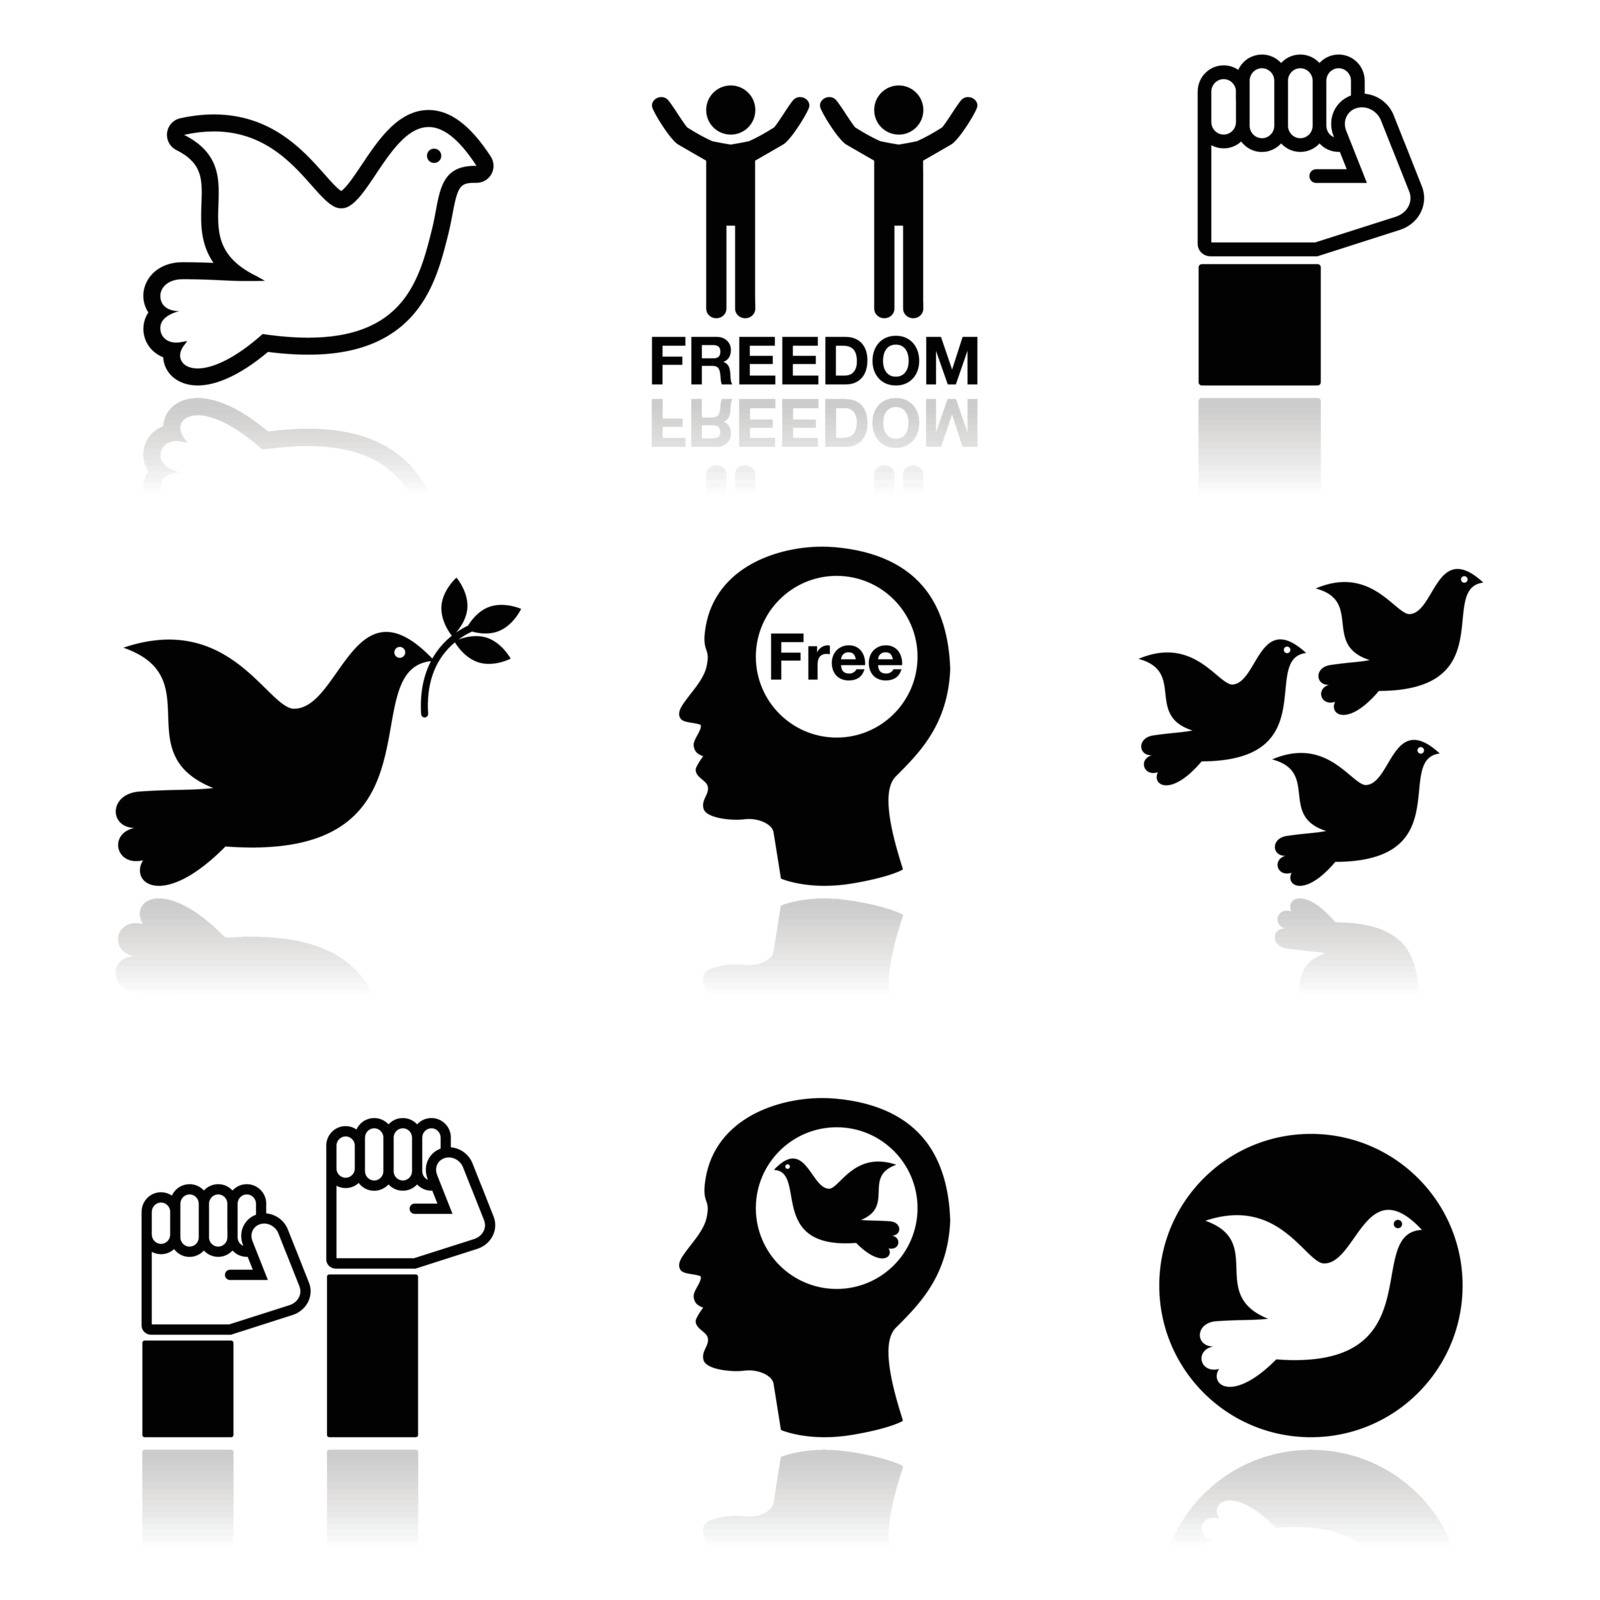 Vector icons set of free people, freedom concept isolated on white